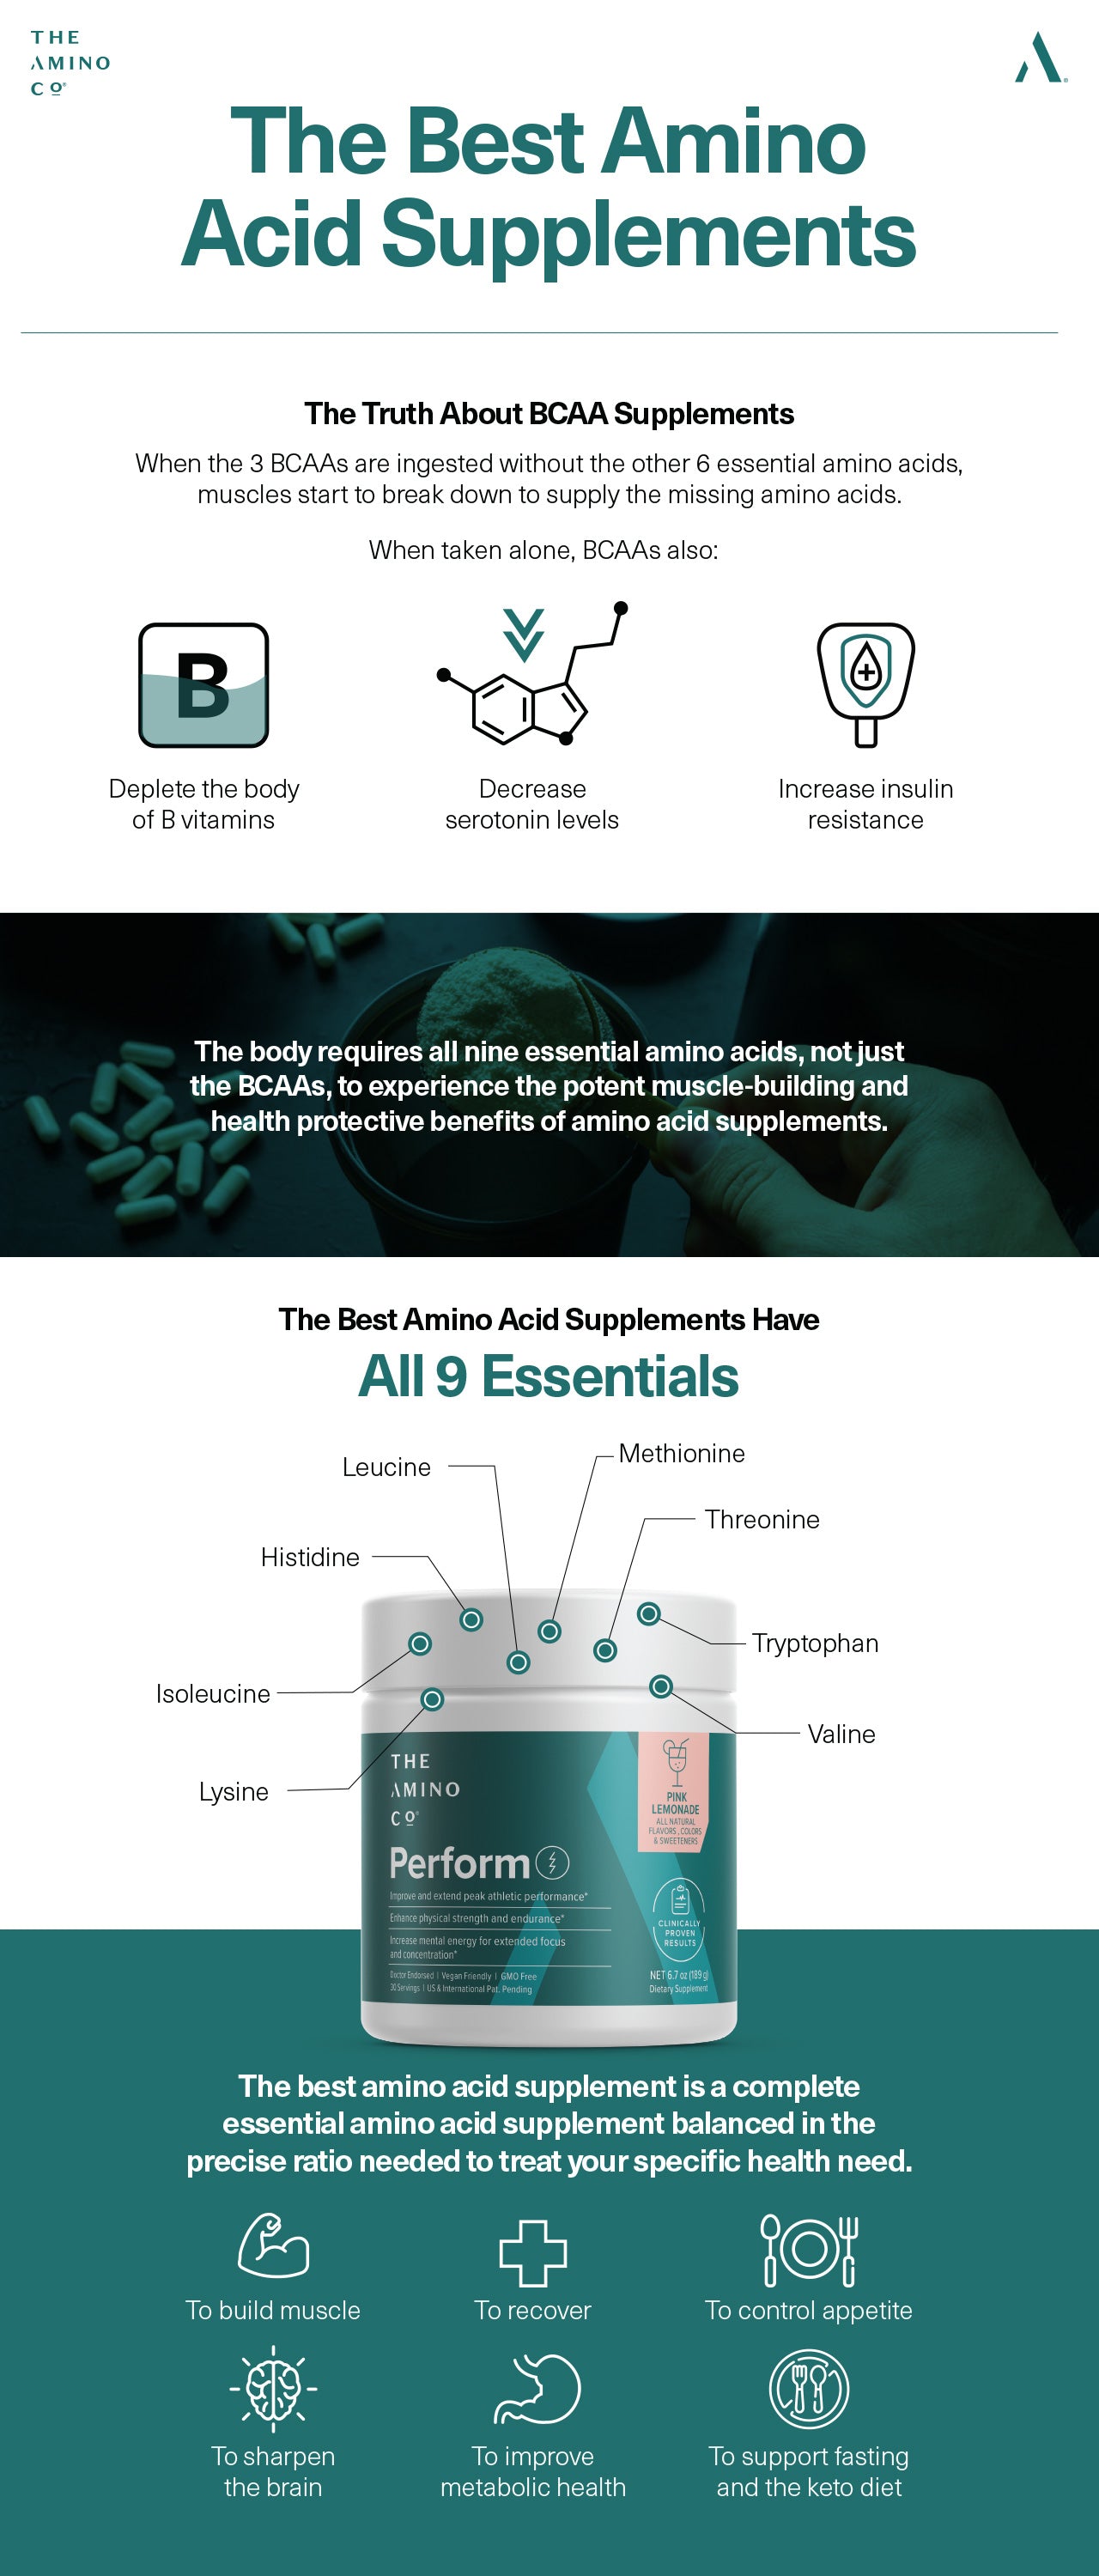 The Best Amino Acid Supplements